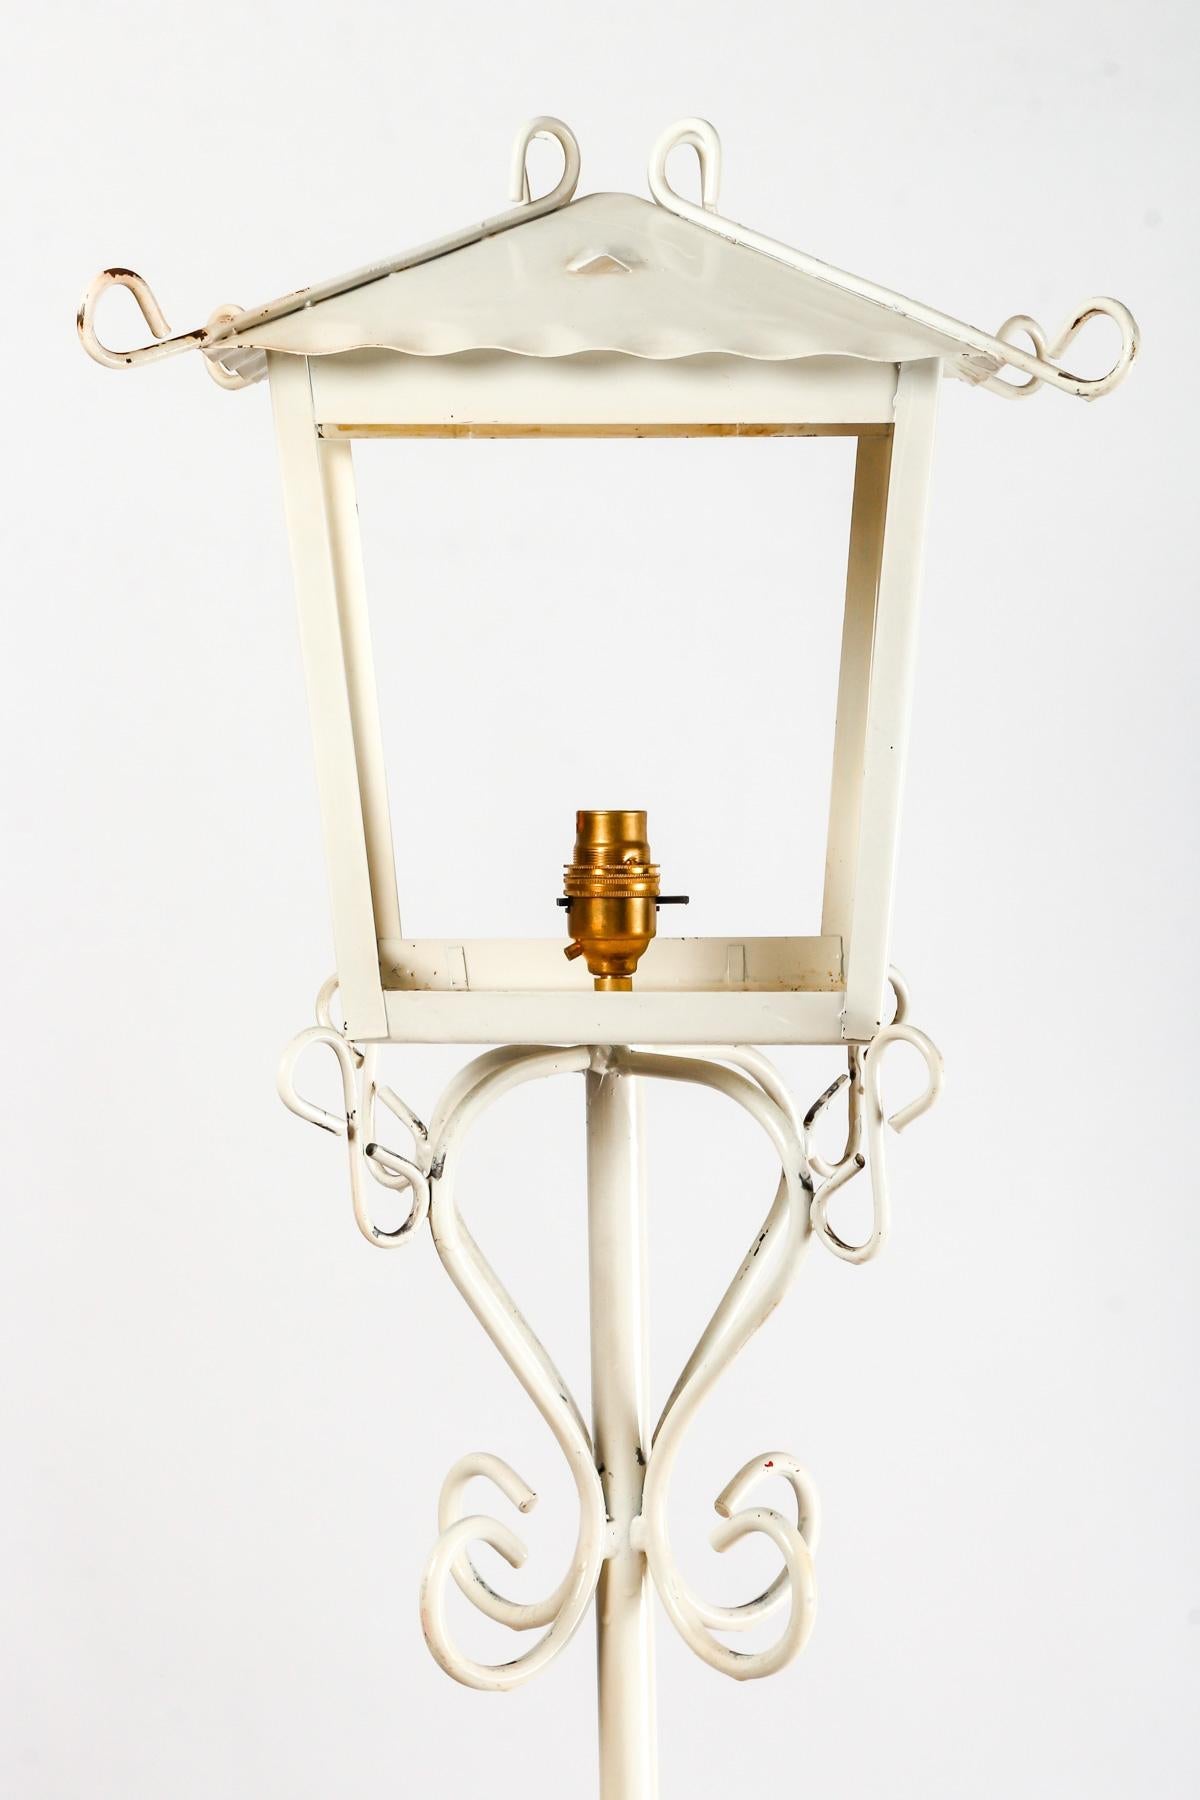 French Floor lamp in Painted Wrought Iron by Maison R.Gleizes, 1950-1960 Design. For Sale